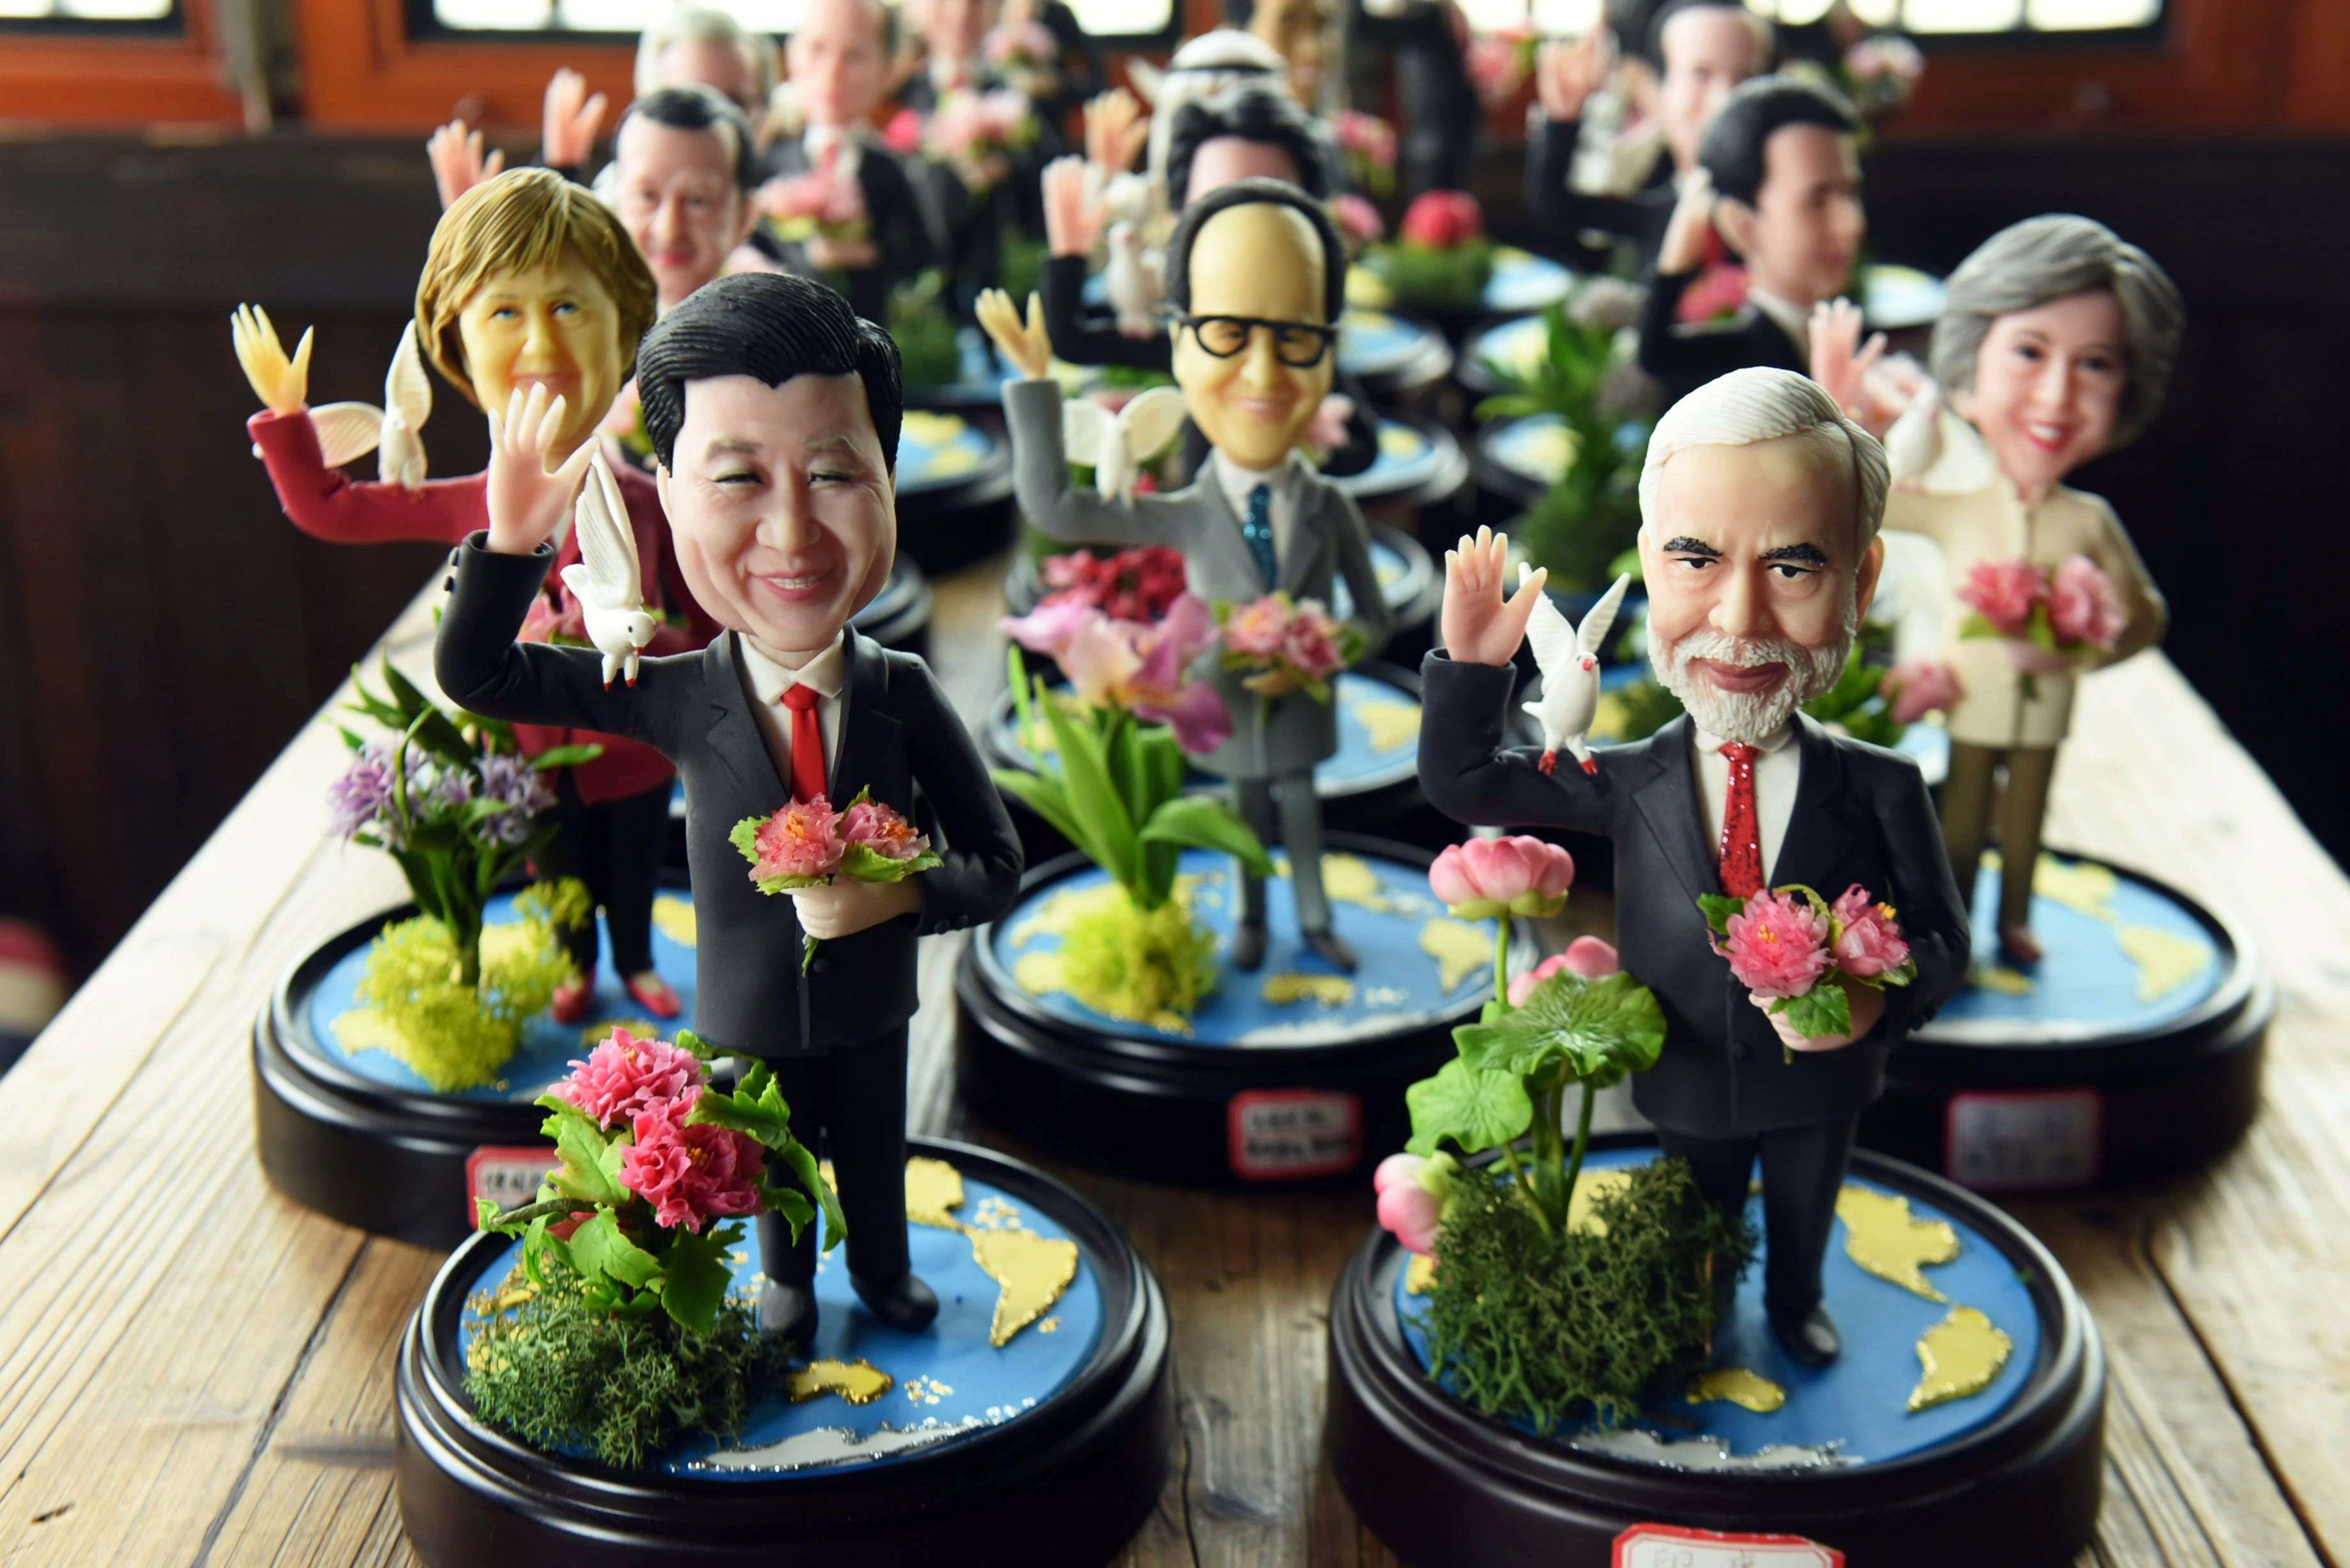 President Xi Jinping heads a line-up of dough figurines of G20 leaders made by folk artist Wu Xiaoli to mark the bloc’s first summit in China that begins on September 4 in Hangzhou. China’s internet doctrine puts it at odds with many of its G20 counterparts. Photo: AFP